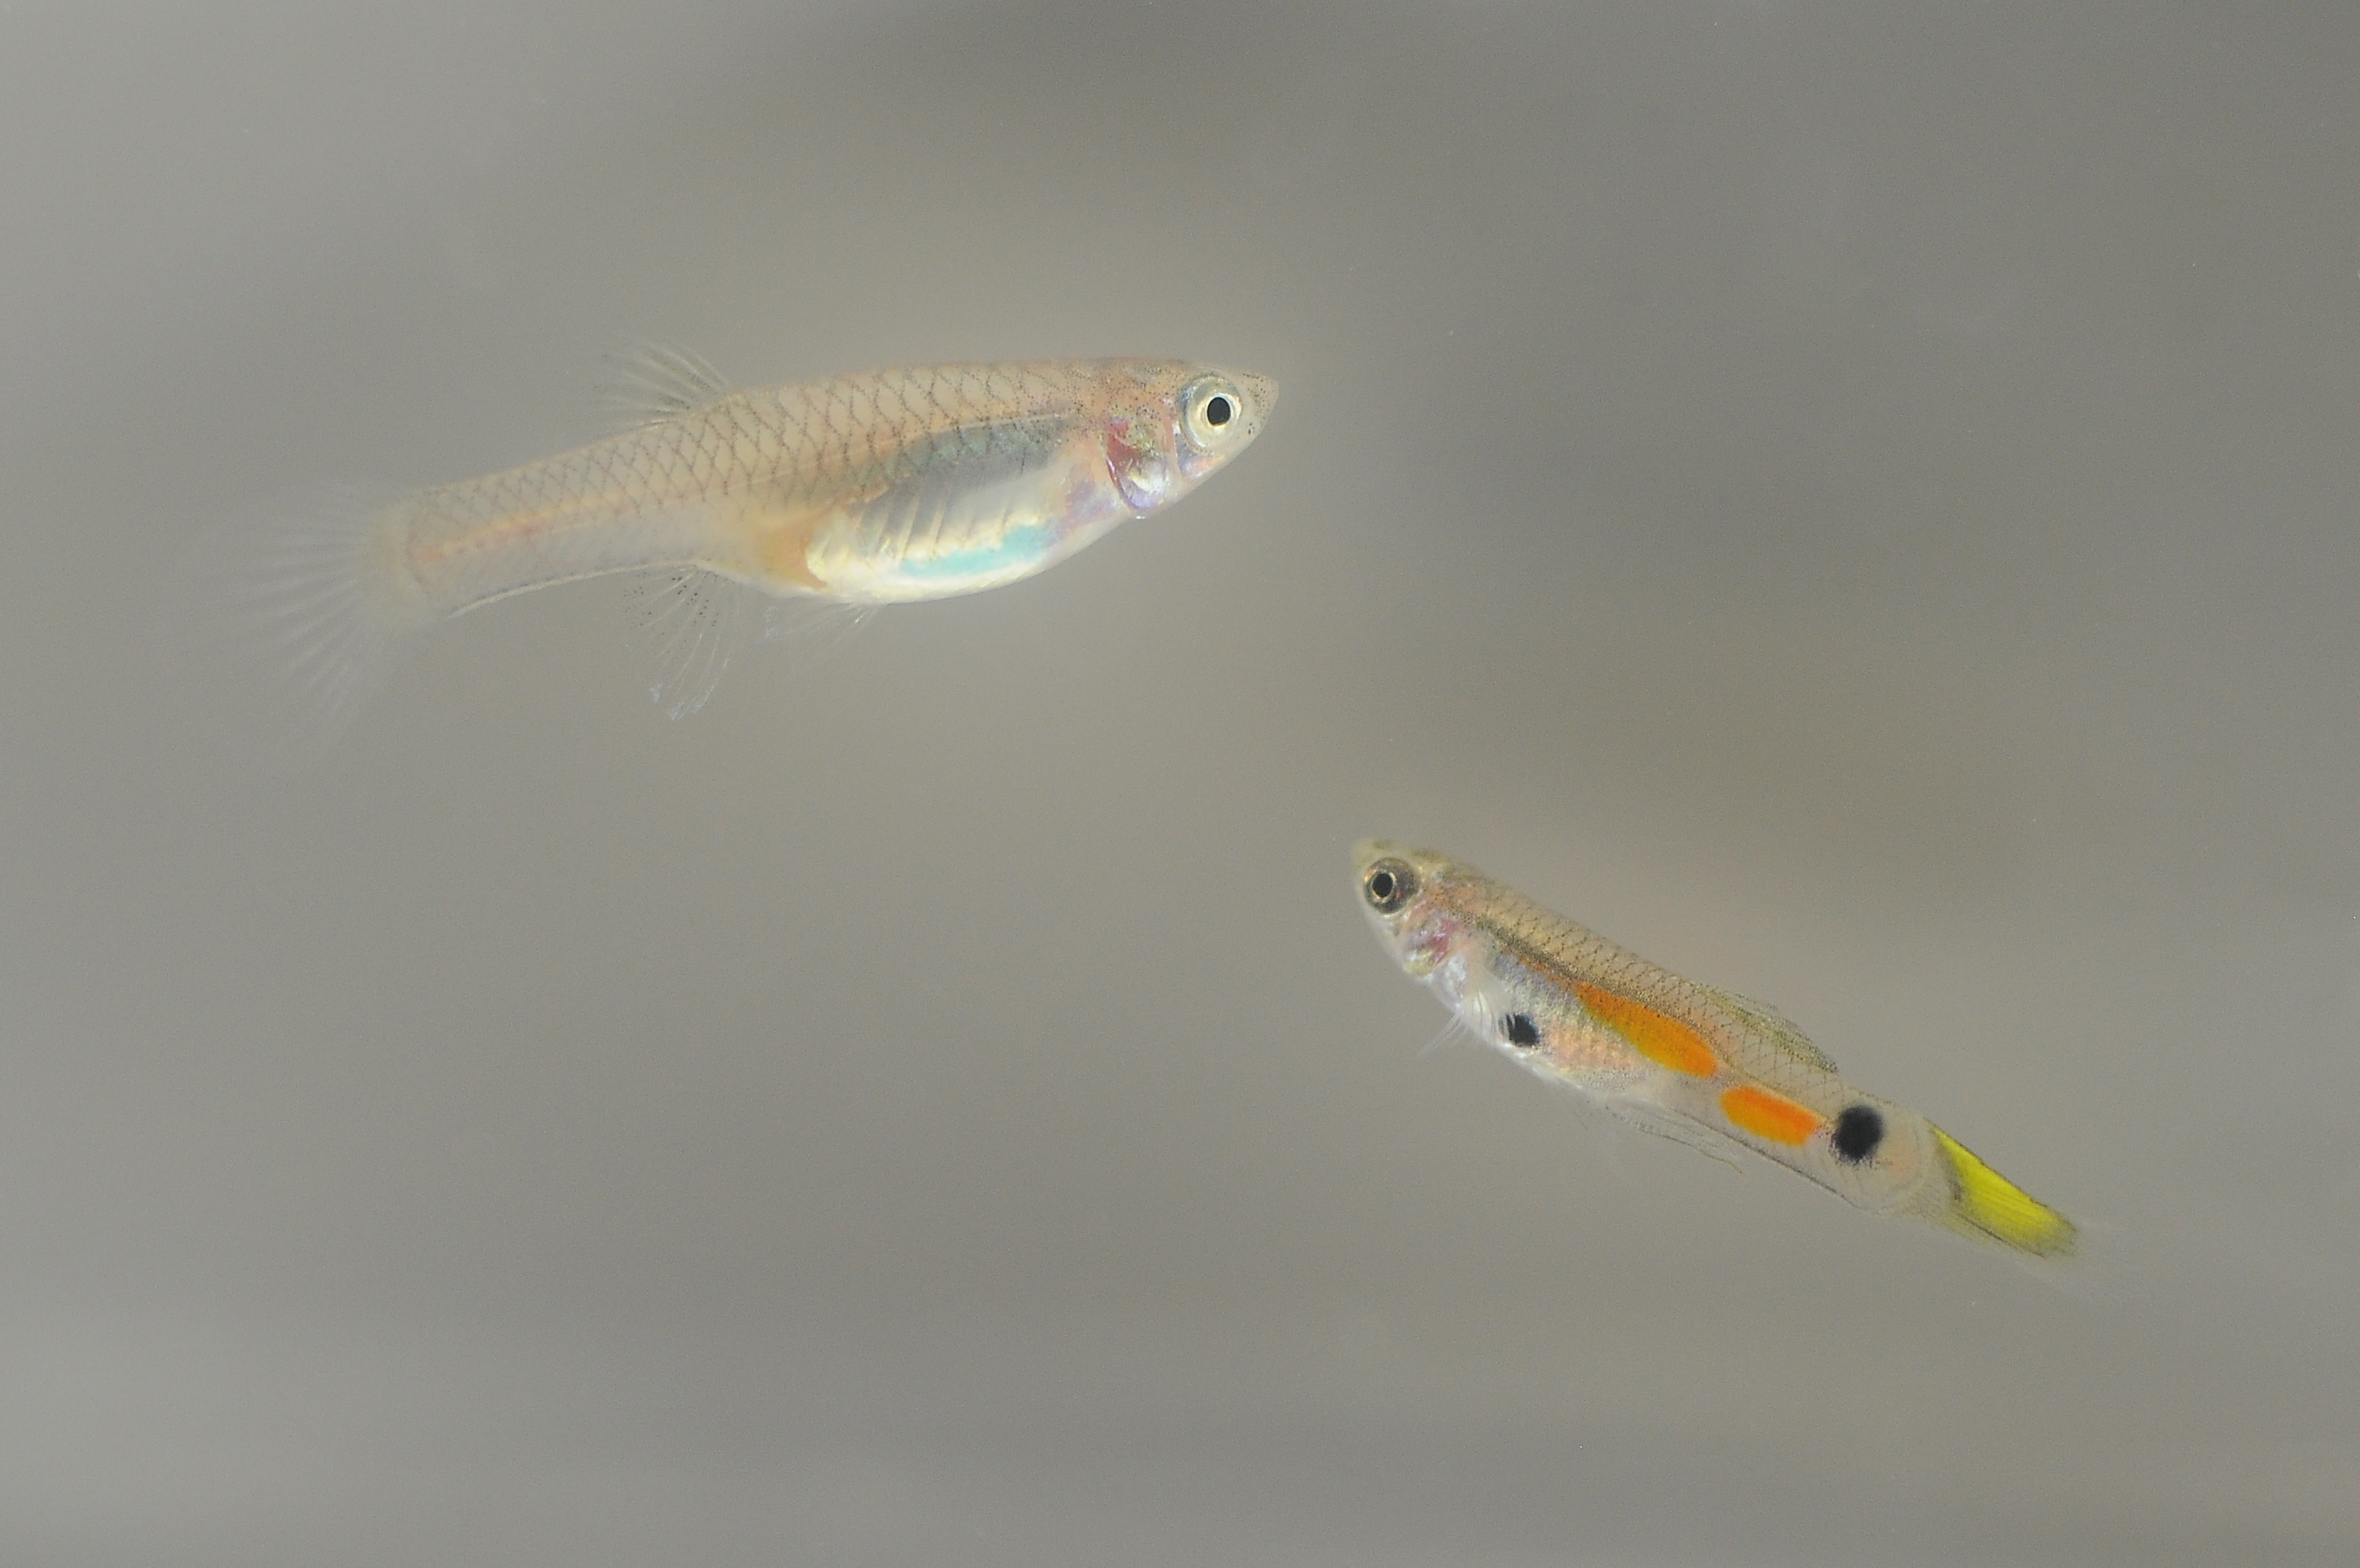 Female guppies, like the fish on the left, saw no reproductive benefit from leaving the house.  In contrast, males, like the fish on the right, who moved more had more offspring.  Credit: Courtesy of Fitzpatrick Lab